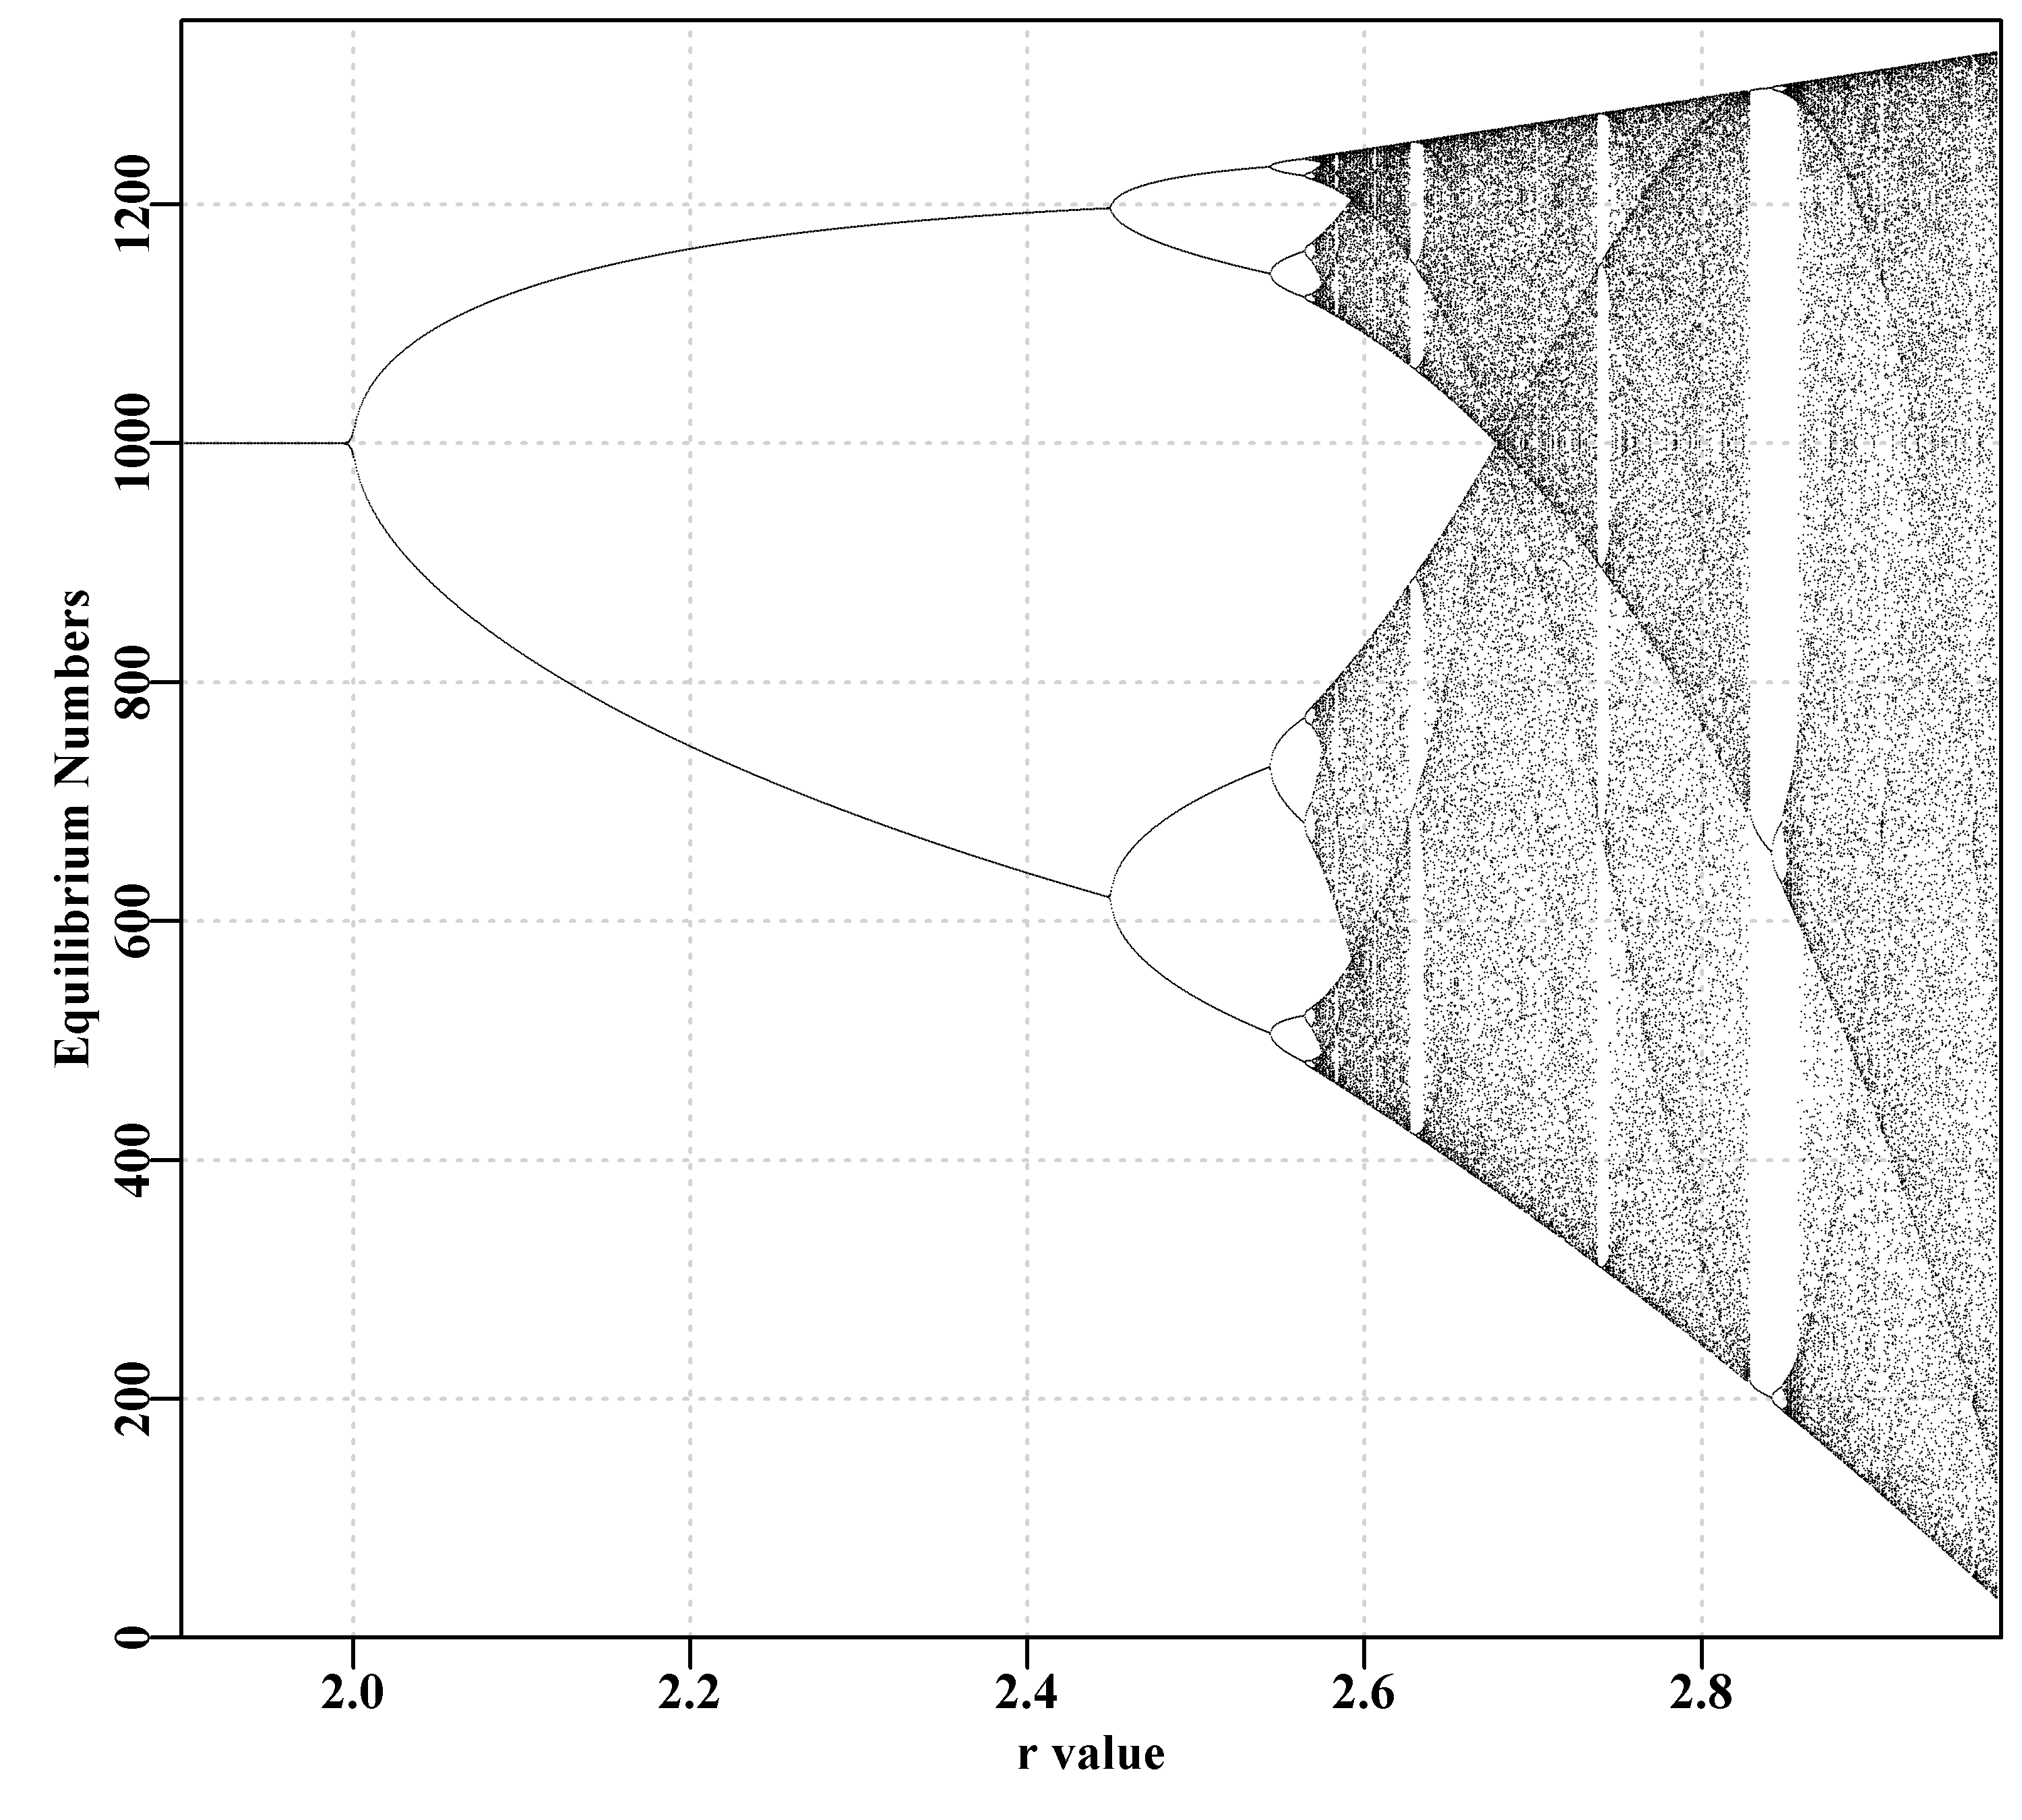 Schaefer model dynamics. A classical bifurcation diagram (May, 1976) plotting equilibrium dynamics against values of r, illustrating the transition from 2-, 4-, 8-cycle, and beyond, including chaotic behaviour.